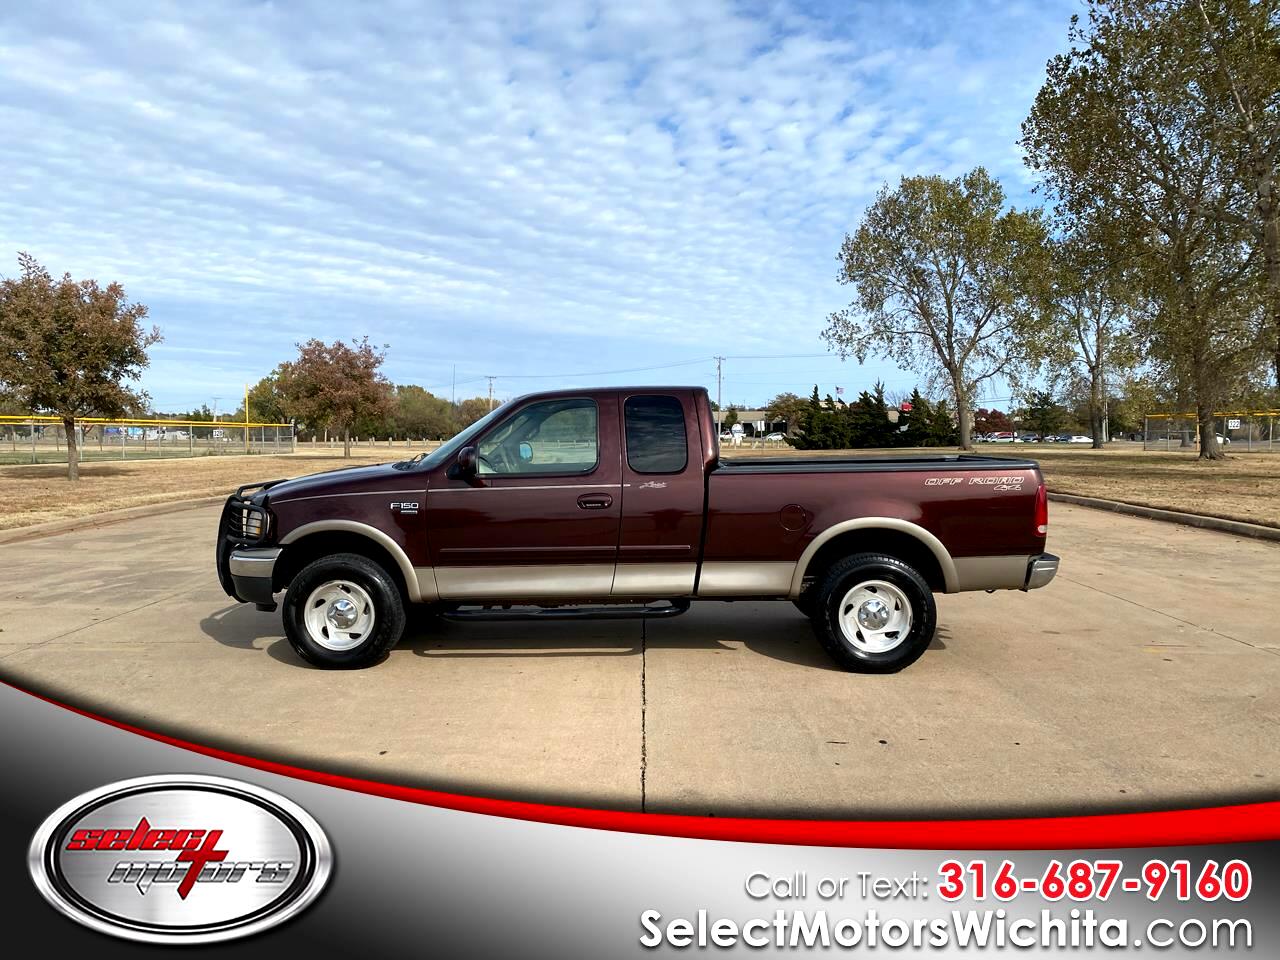 Used 2001 Ford F-150 Supercab 139" Lariat 4WD for Sale in Wichita KS 2001 Ford F150 Triton V8 Towing Capacity